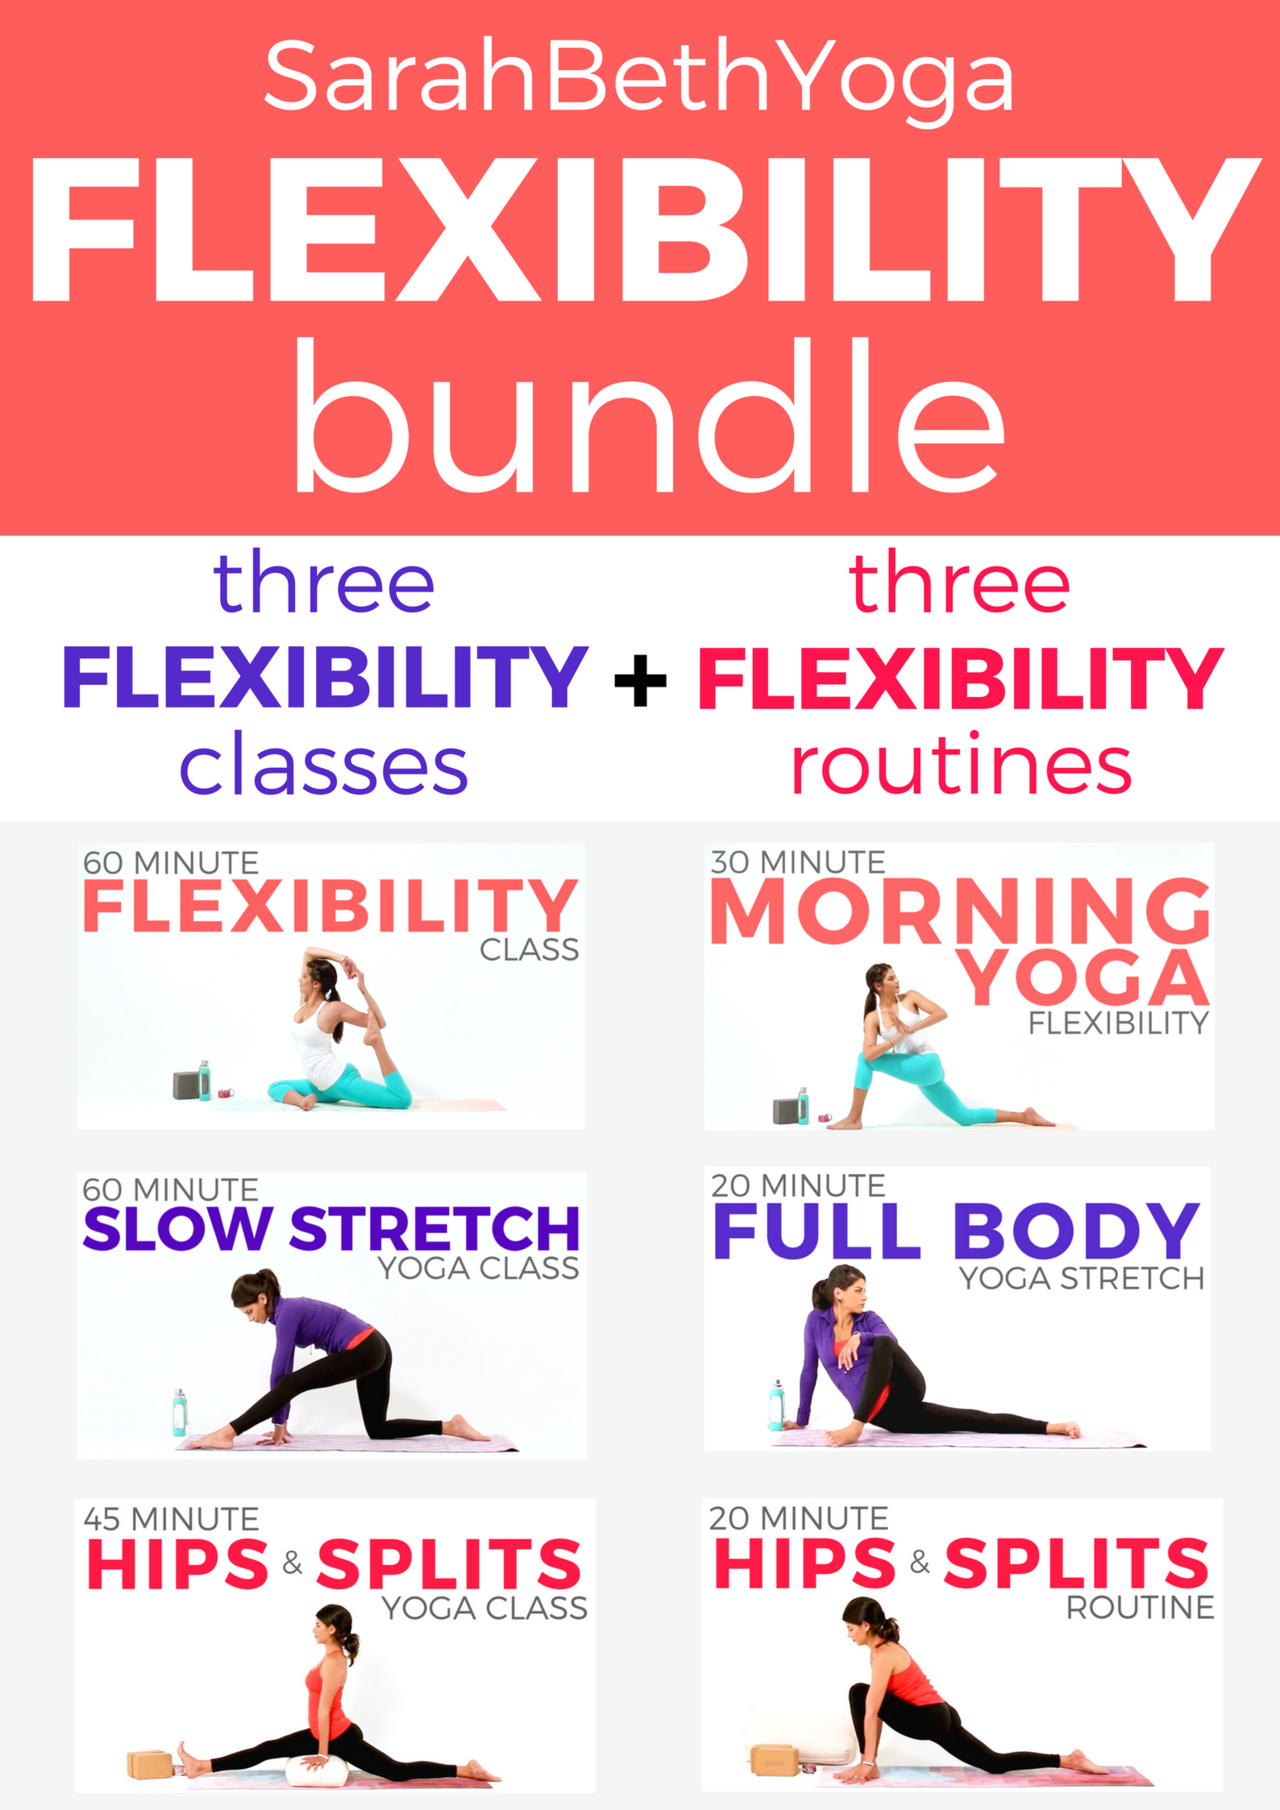 STRETCH, LENGTHEN & DEEPEN your flexibility with